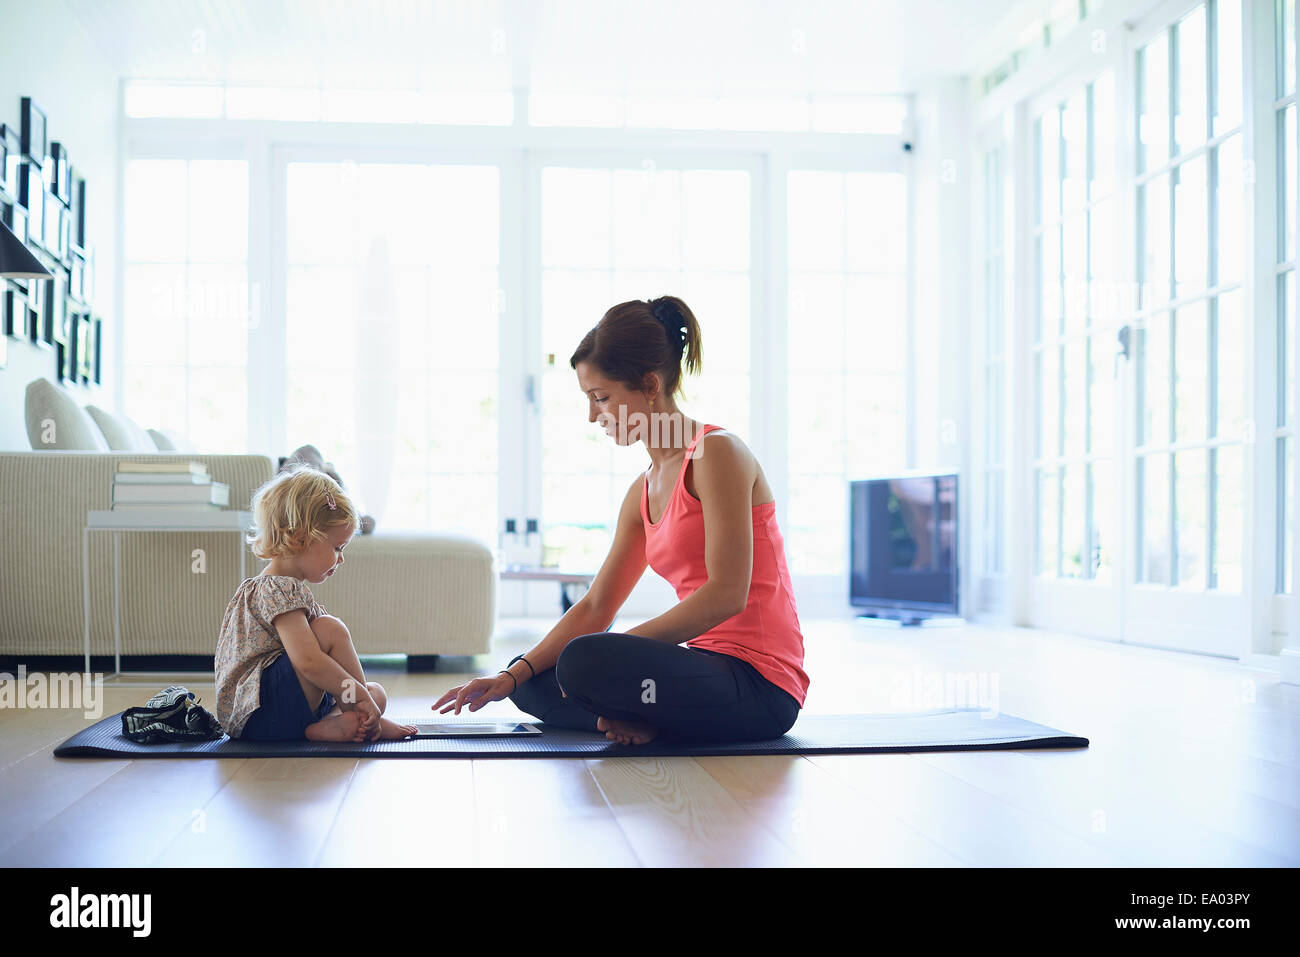 Mid adult mother and toddler daughter practicing yoga in living room Banque D'Images